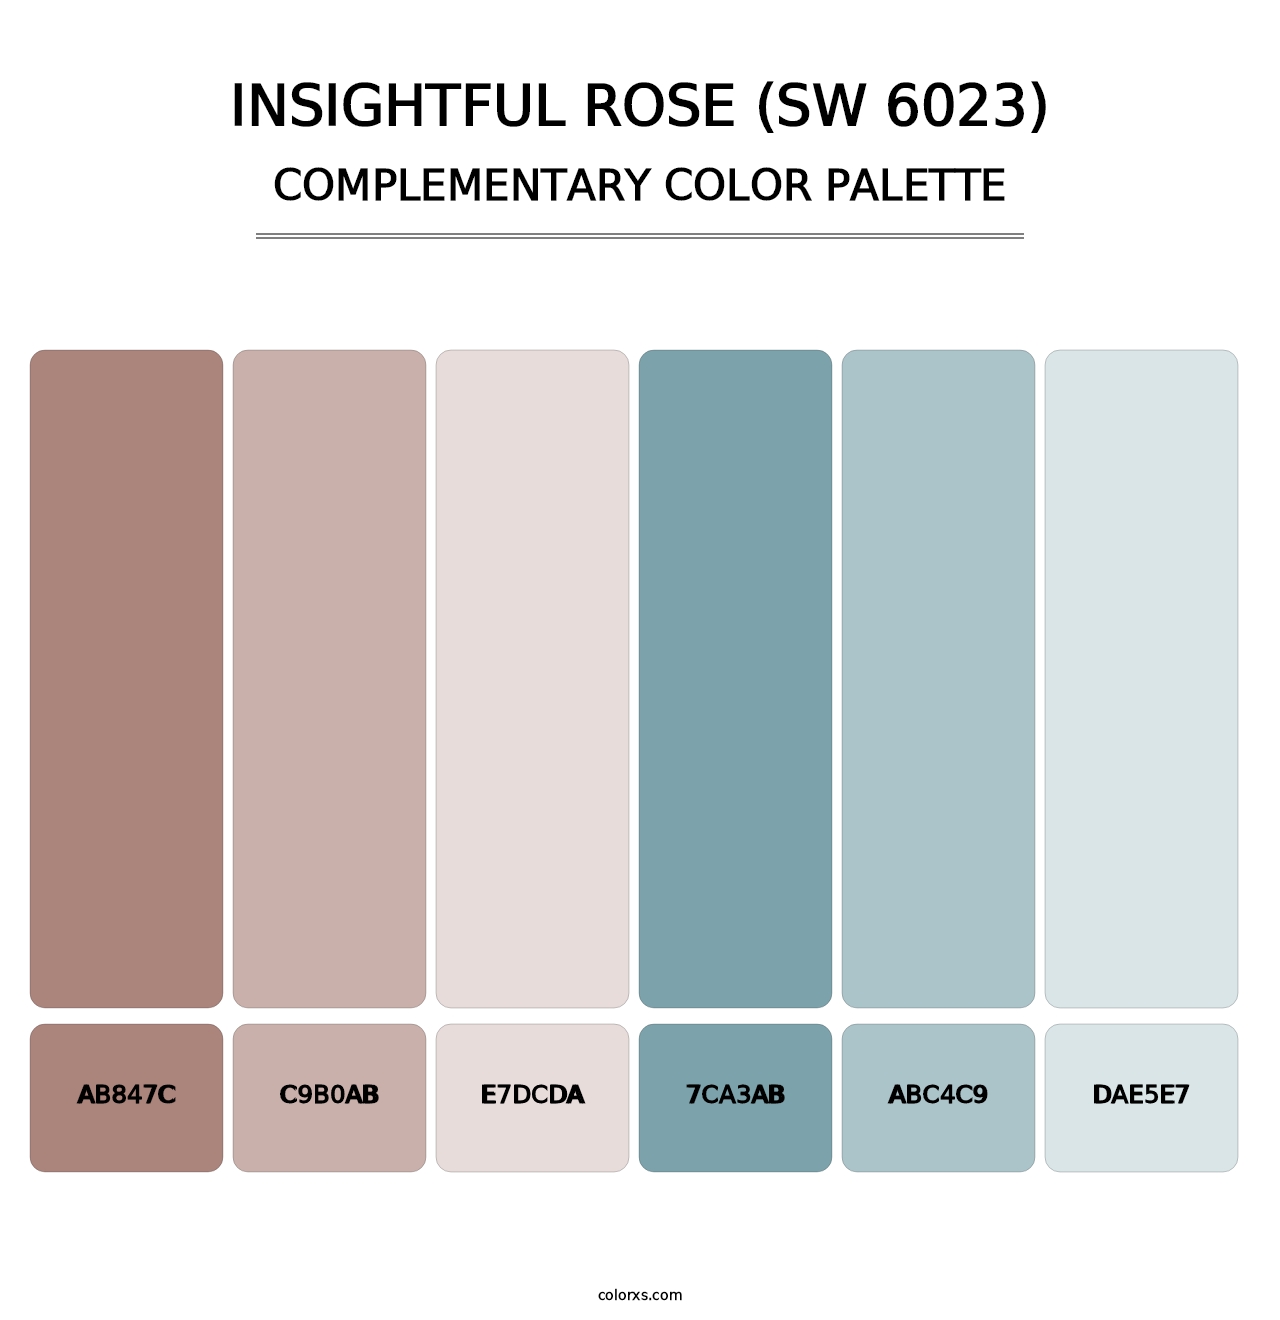 Insightful Rose (SW 6023) - Complementary Color Palette